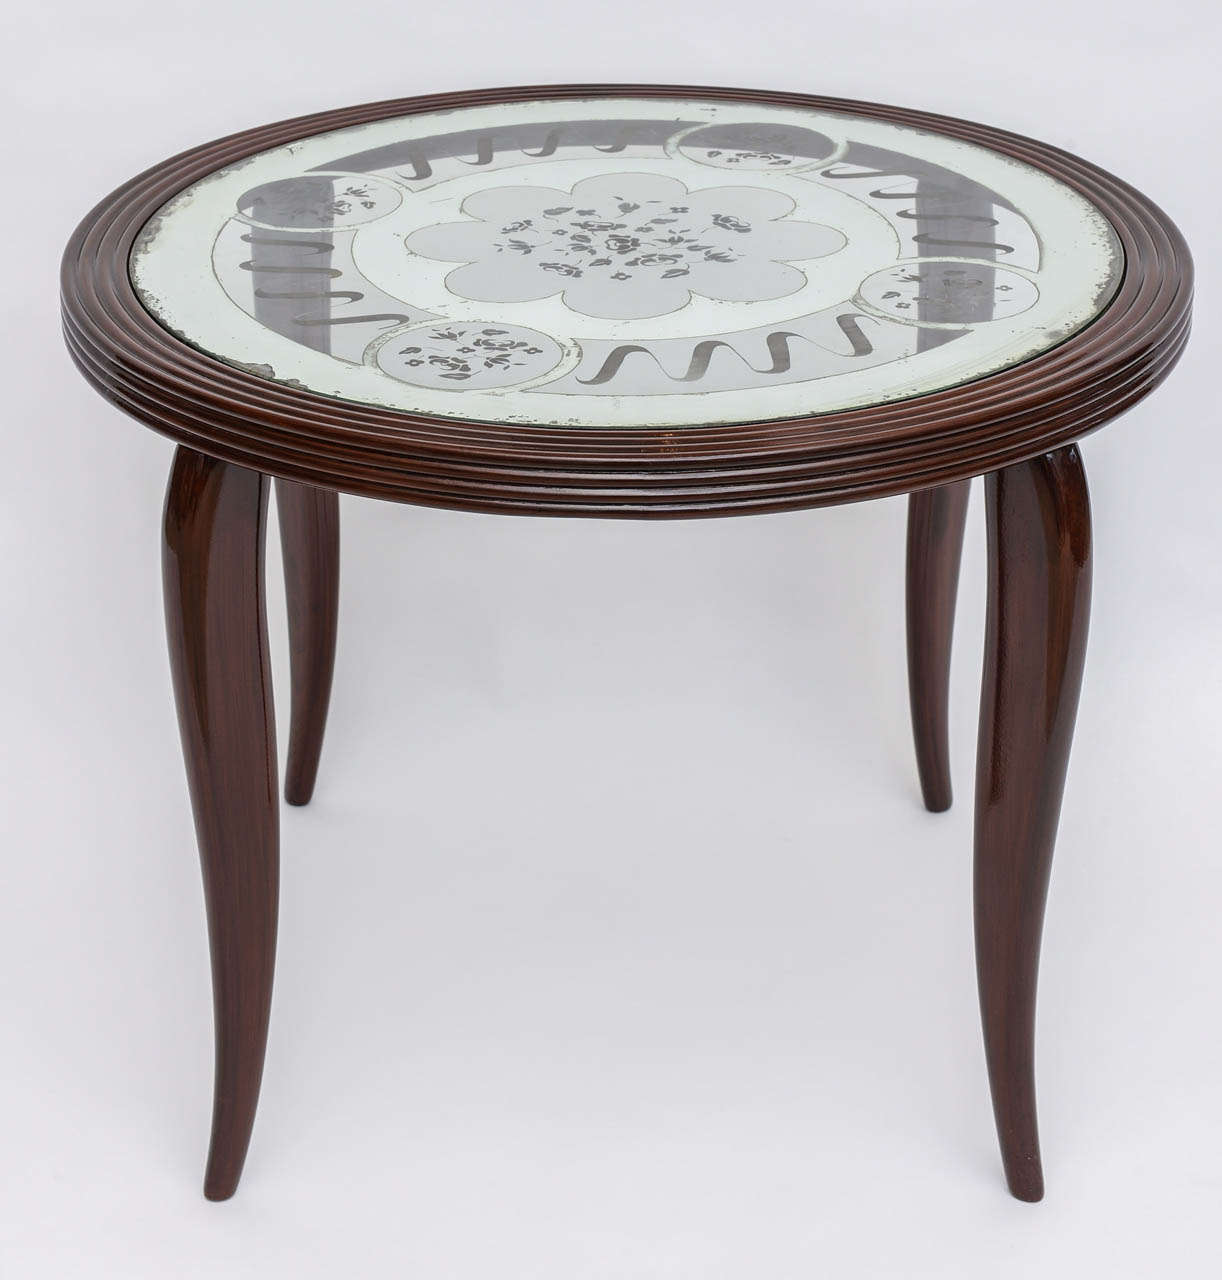 The round table top with etched and mirrored glass insert supported by foru tapered legs.